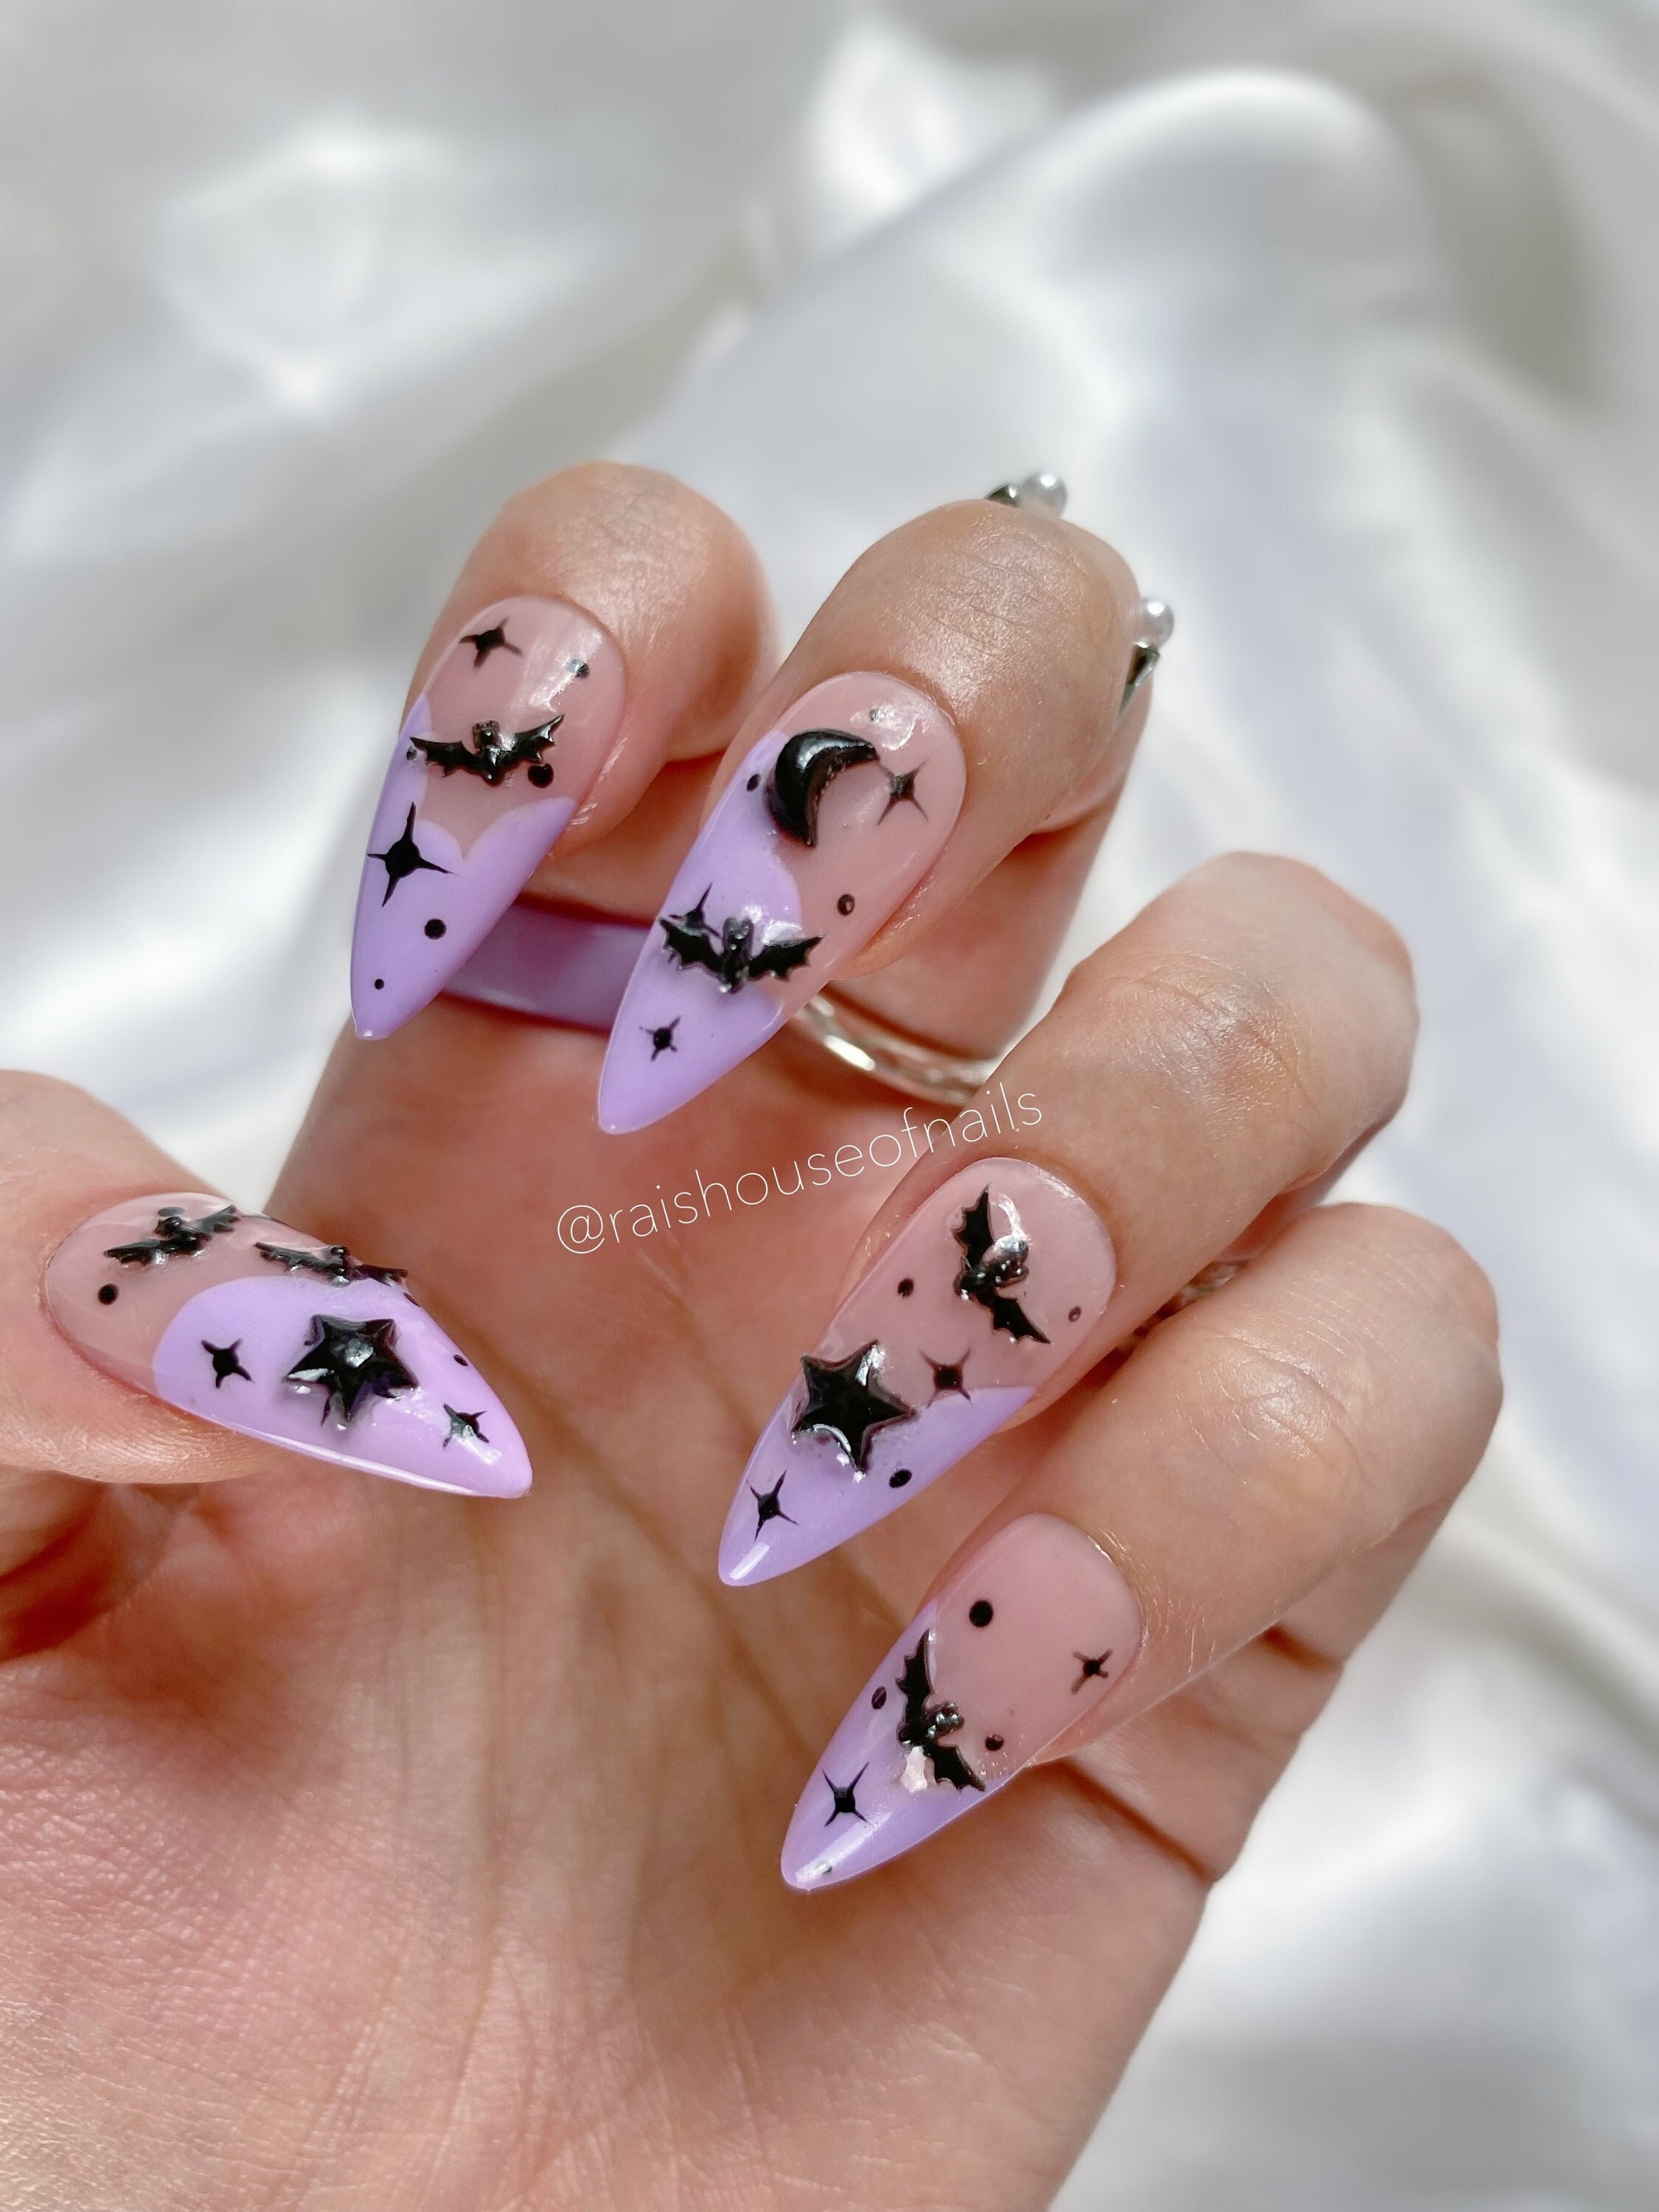 ROMWE Goth 24pcs Simple Star Shaped False Nails And 1pc Tape | SHEIN